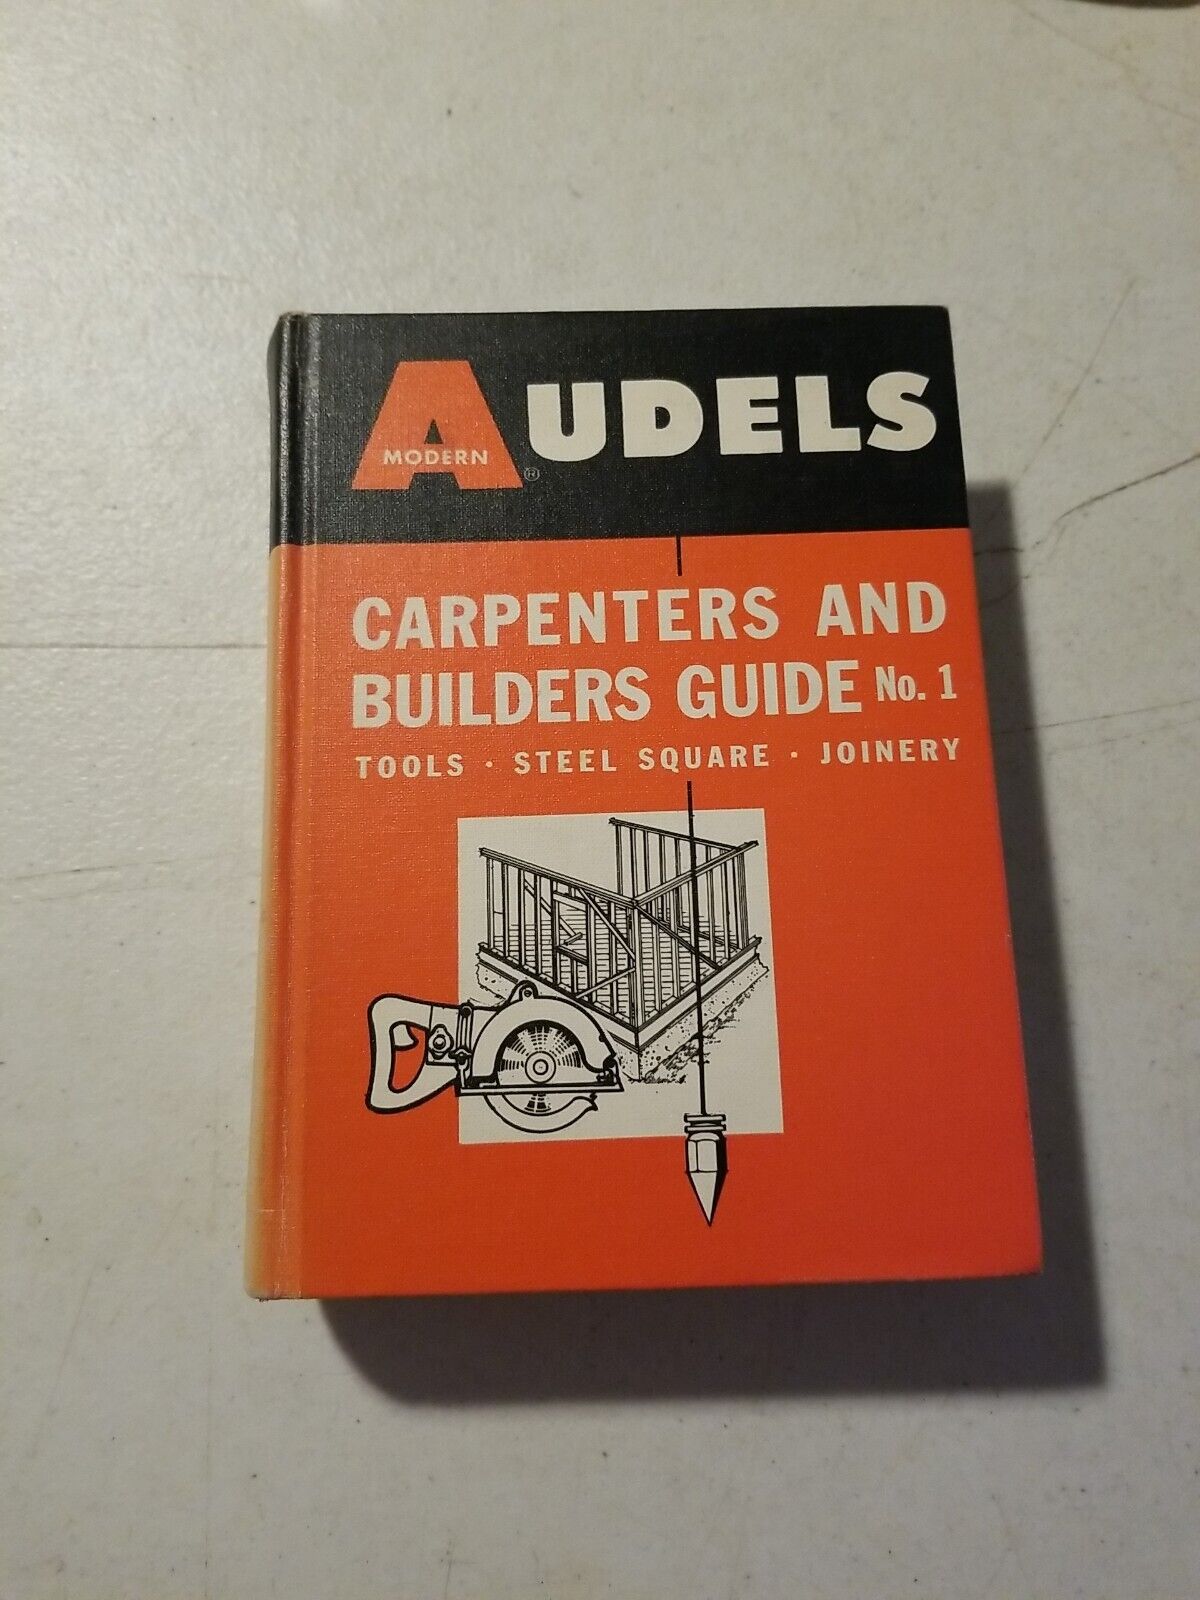 AUDELS Carpenters and Builders Guide No. 1 1966 Frank P. Graham Hardcover